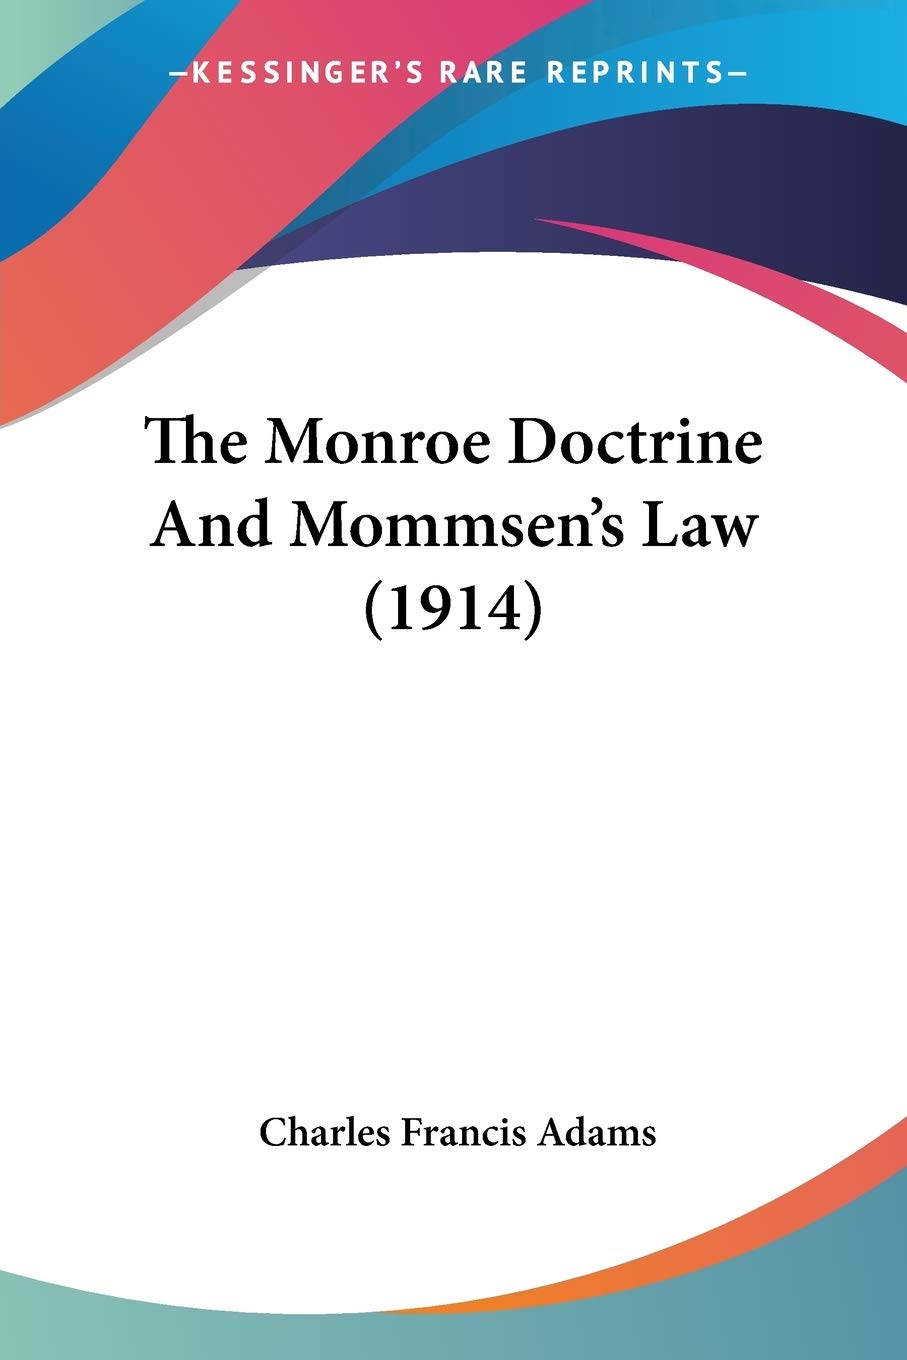 The Monroe Doctrine And Mommsen's Law